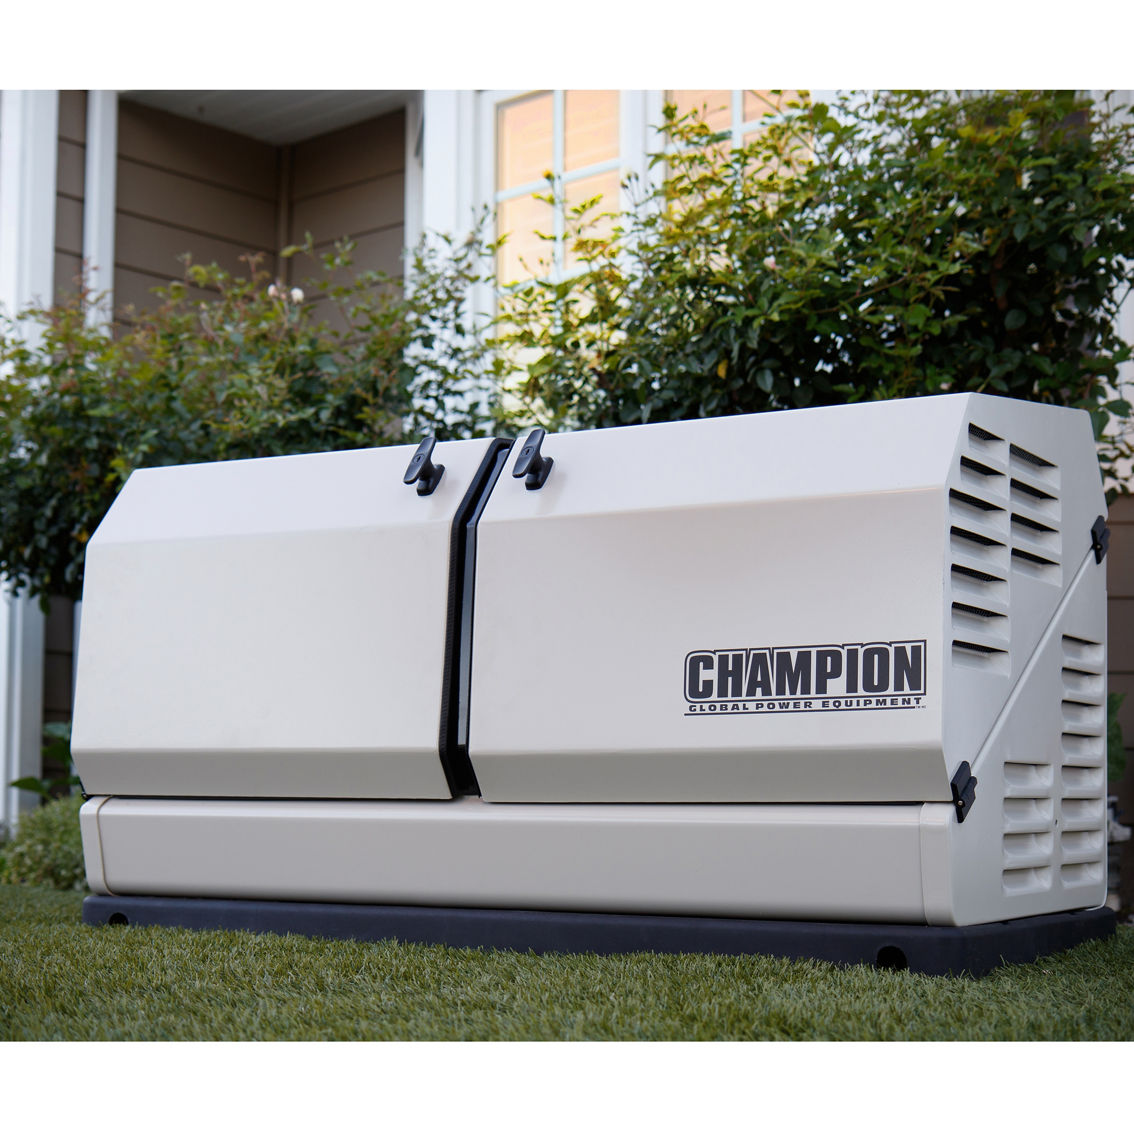 Champion 14kW aXis Home Standby Generator System with 200-Amp Auto Transfer Switch - Image 4 of 8